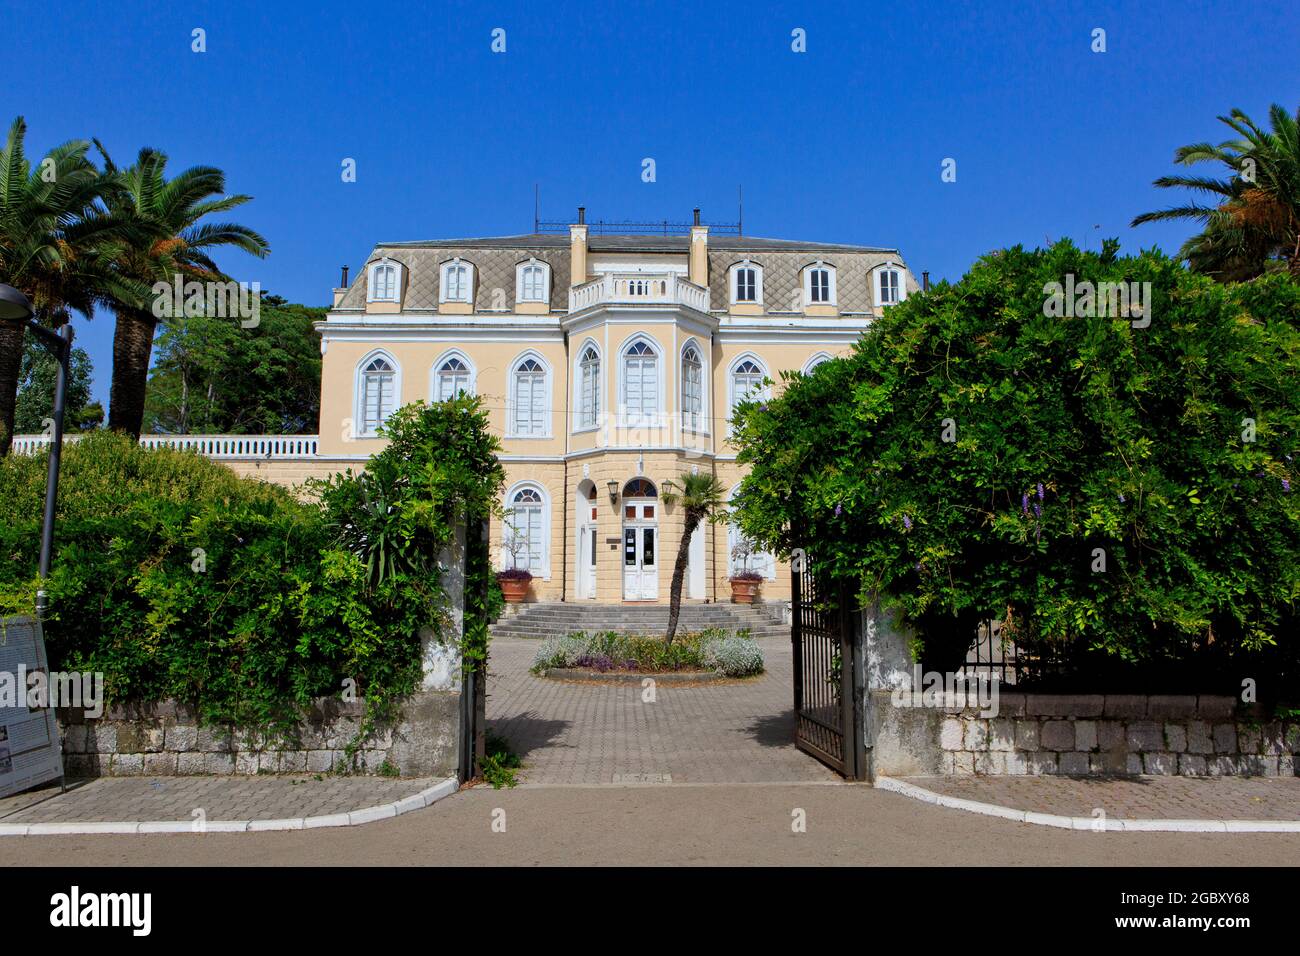 The palace of Nicholas I of Montenegro (1841-1921) in Bar, Montenegro Stock Photo